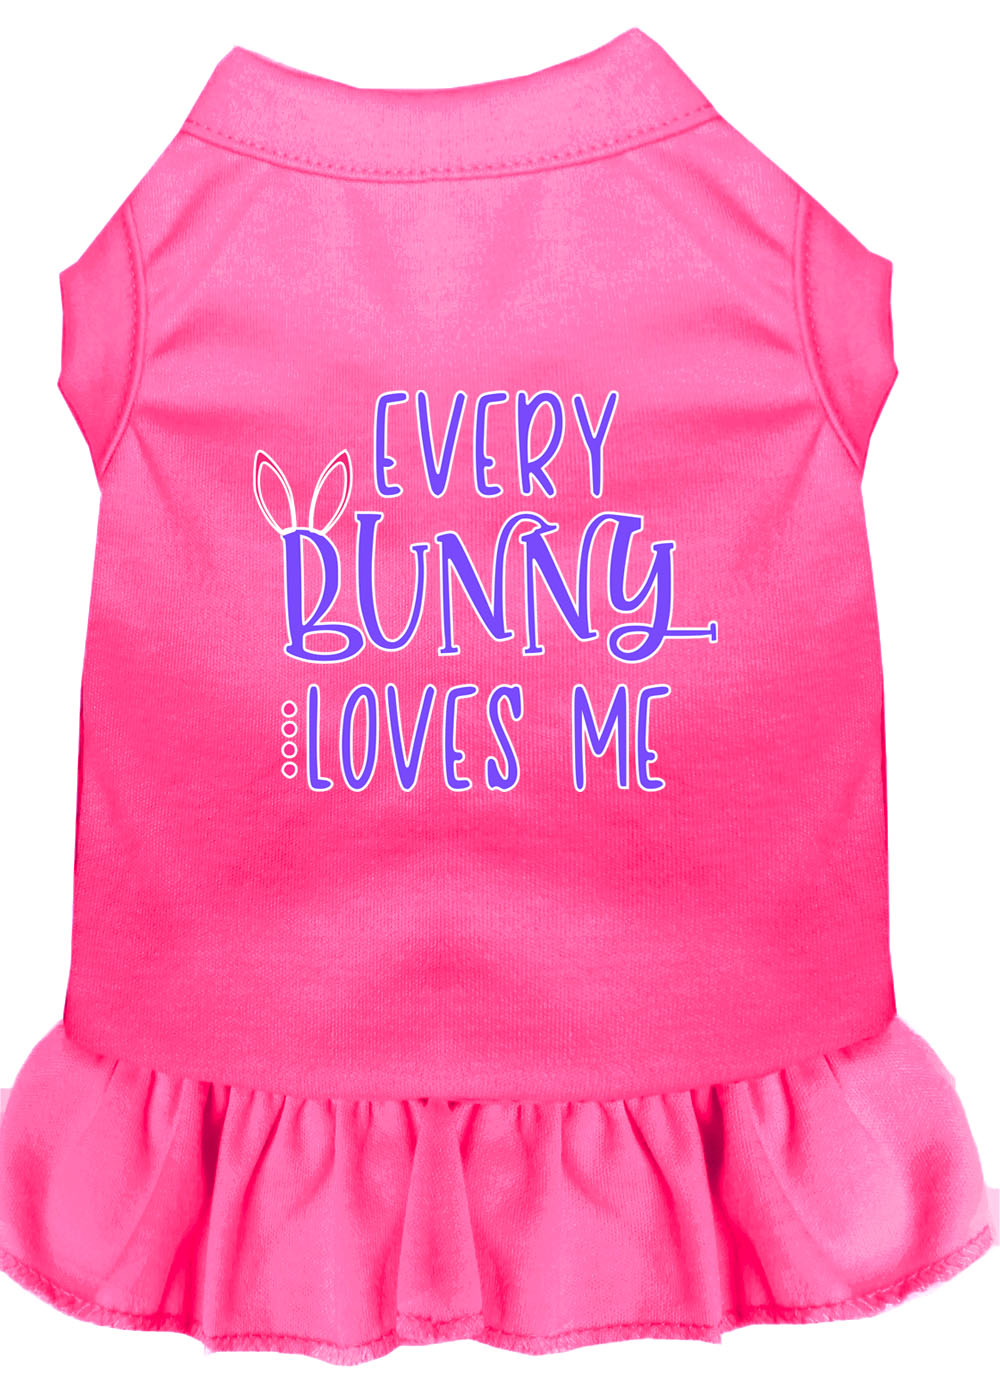 Every Bunny Loves me Screen Print Dog Dress Bright Pink Lg